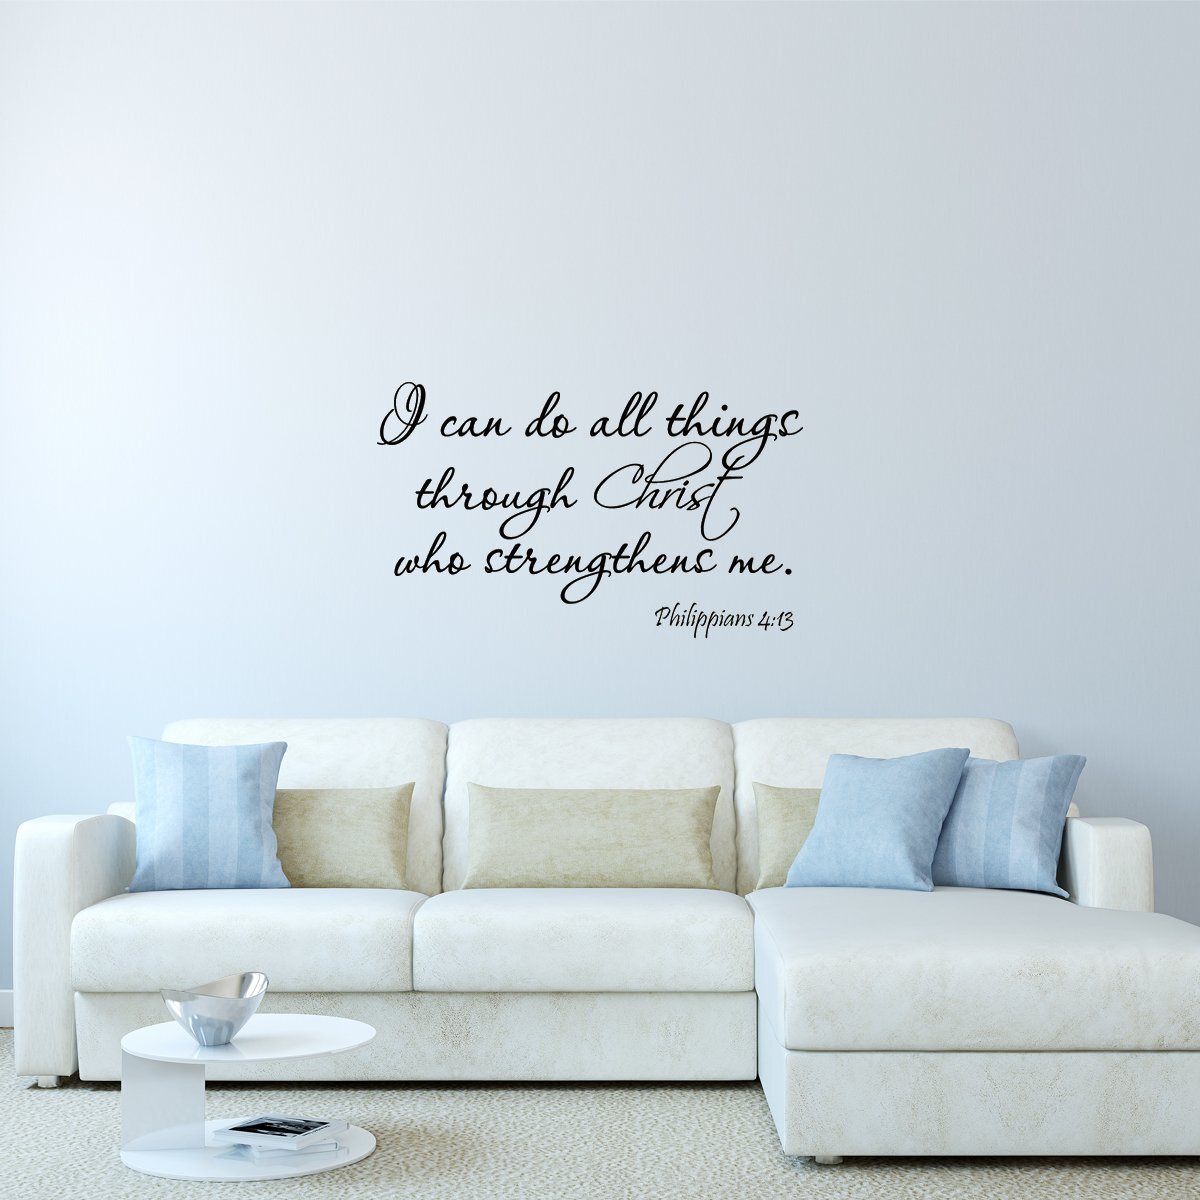 Winston Porter Non-Wall Damaging Wall Decal